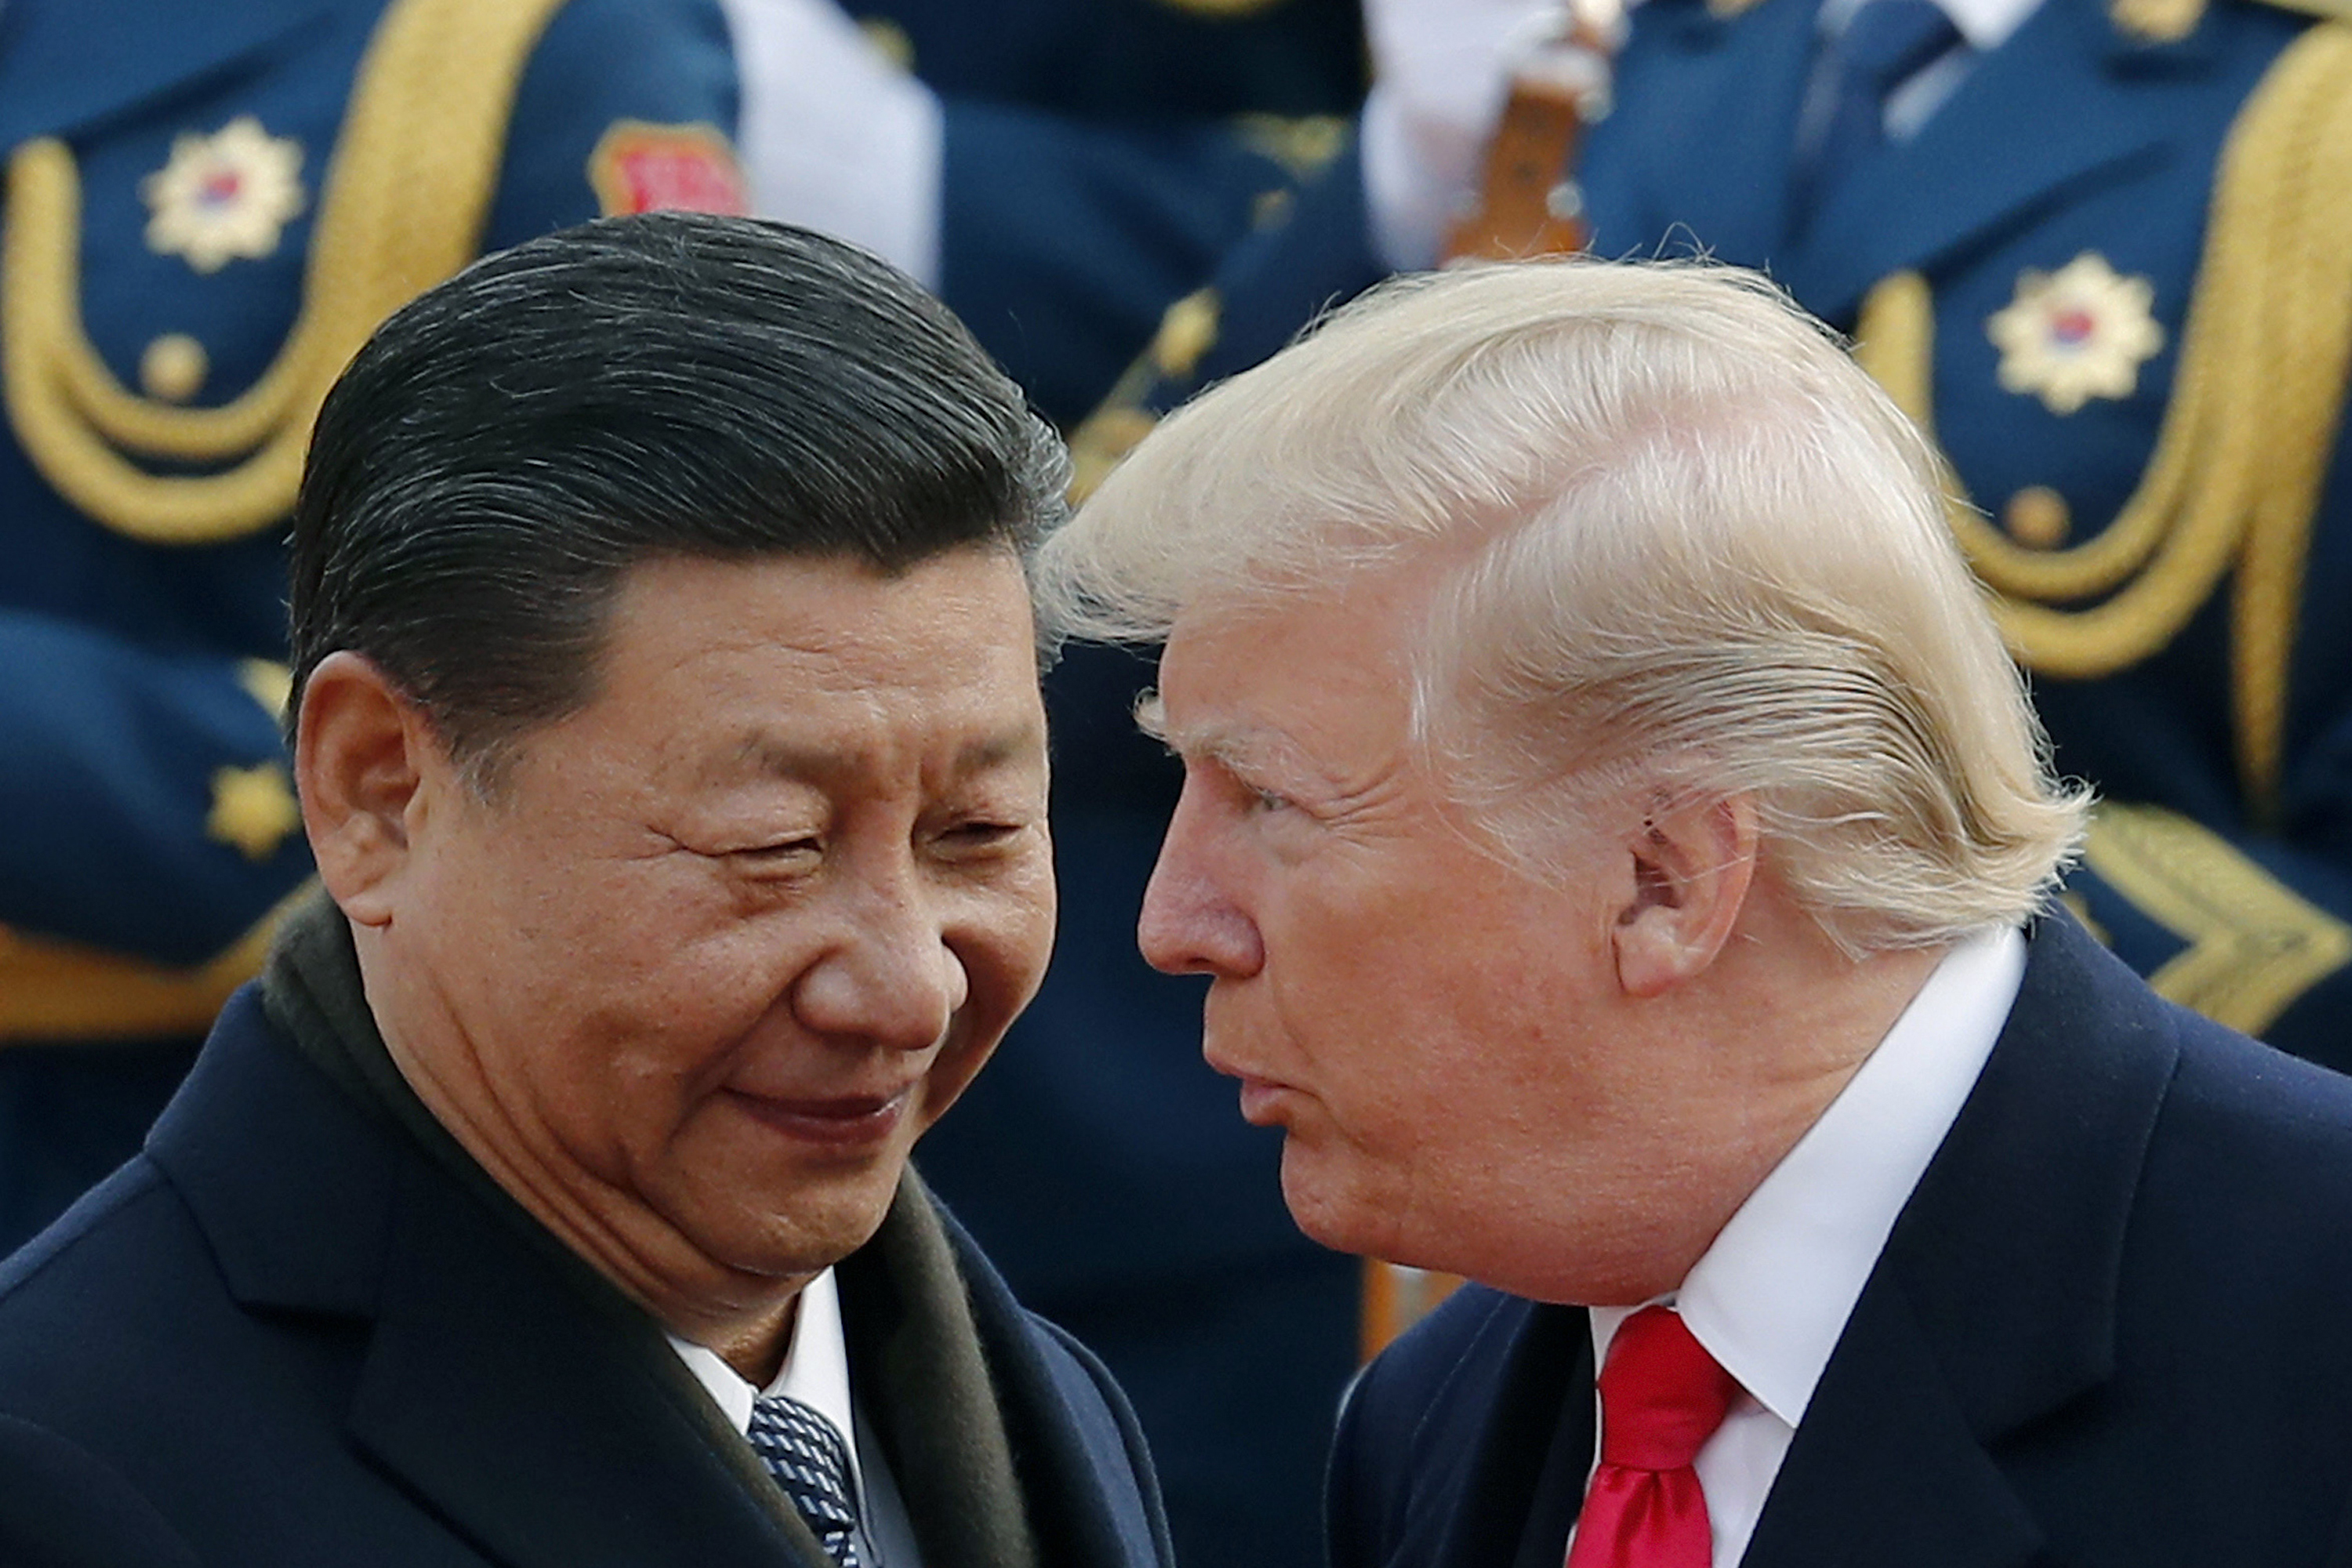 US President Donald Trump chats with Chinese President Xi Jinping during a welcome ceremony at the Great Hall of the People in Beijing, in 2017.